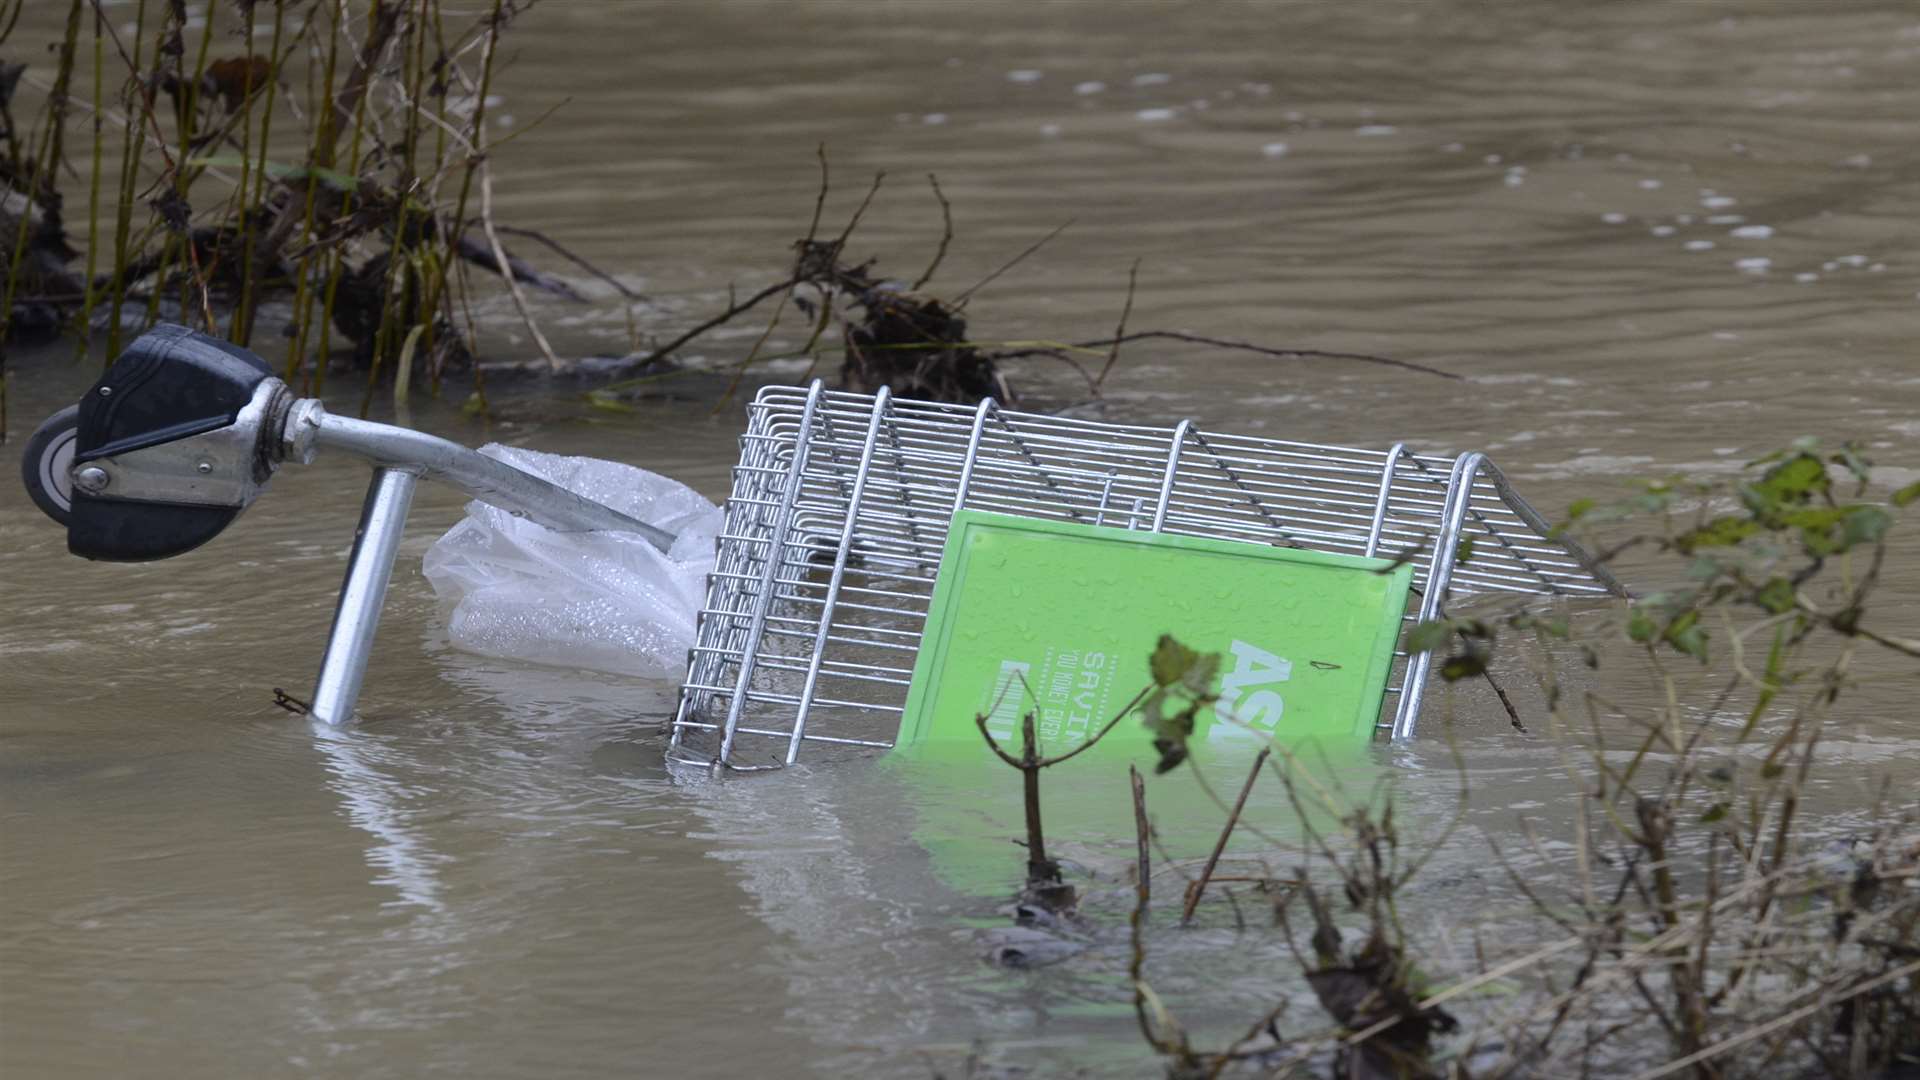 A number of trolleys have been thrown in the river. Picture: Gary Browne